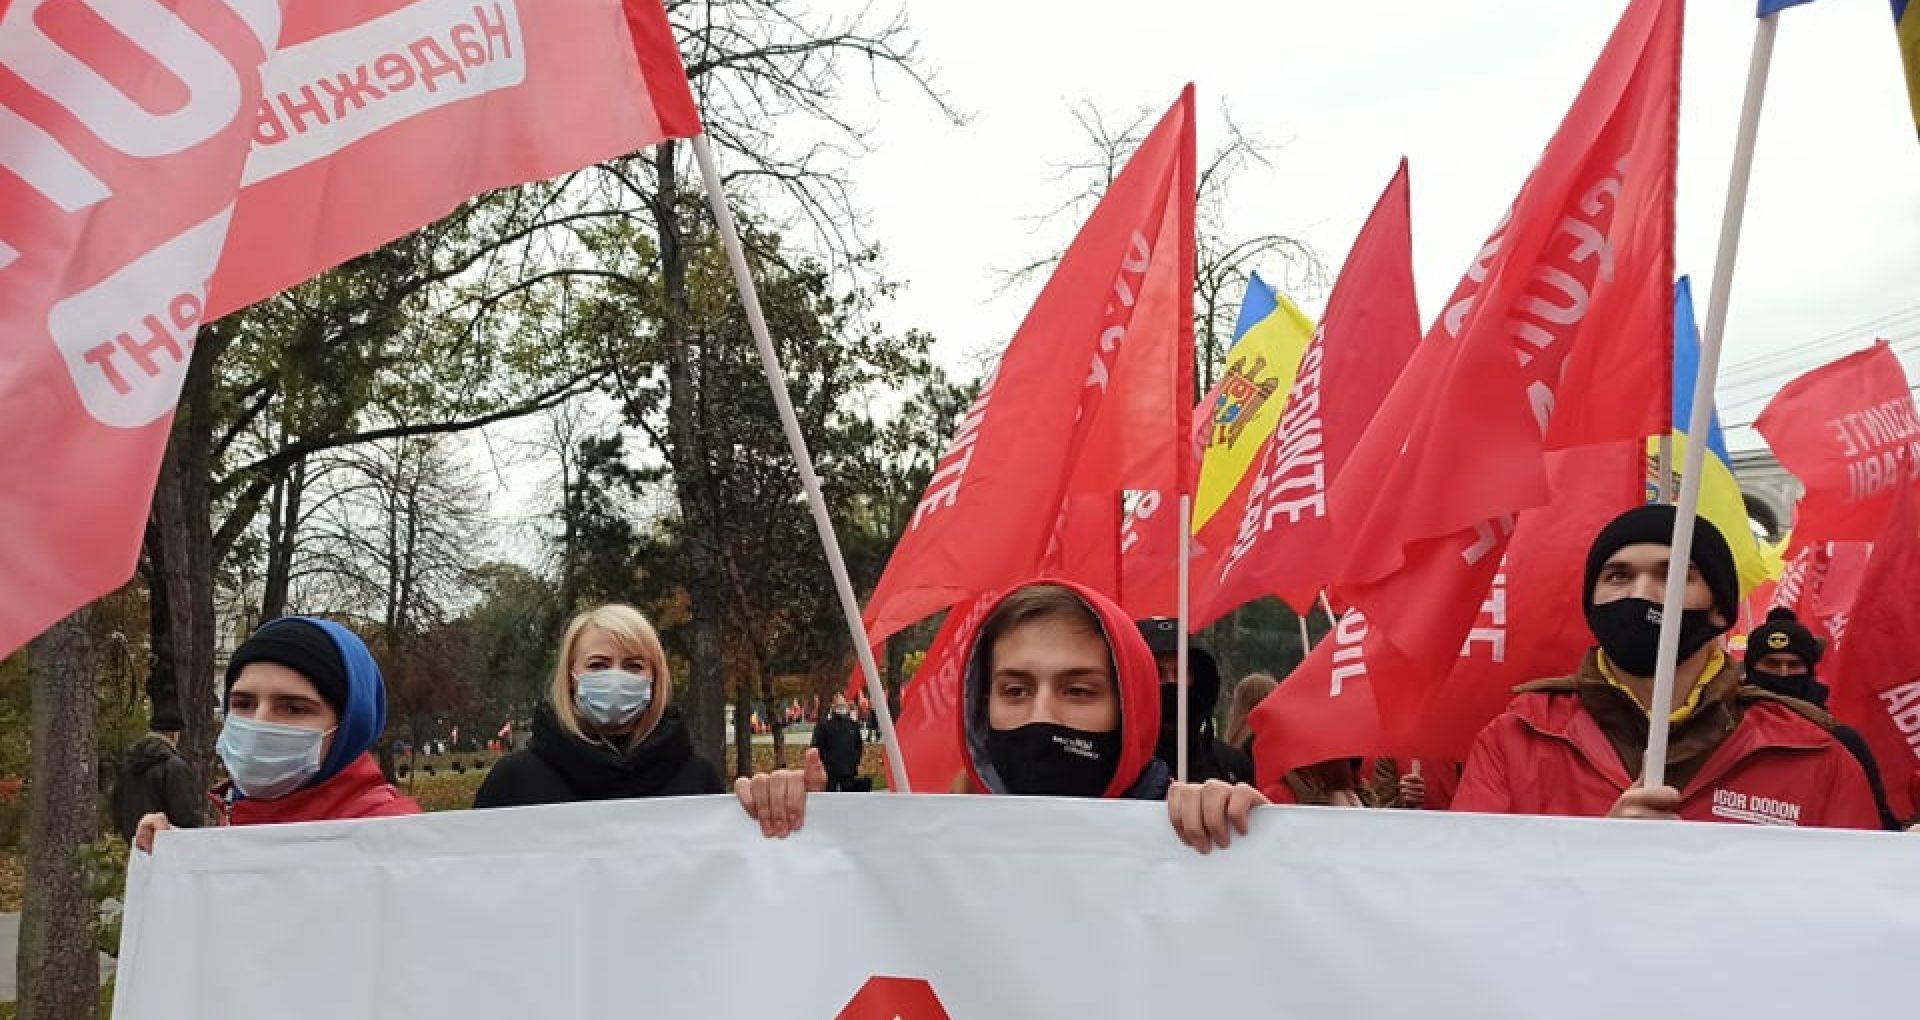 Organized March in Chisinau: The Socialists Party Gathered Supporters For the Independent Candidate Dodon in the Presidential Race